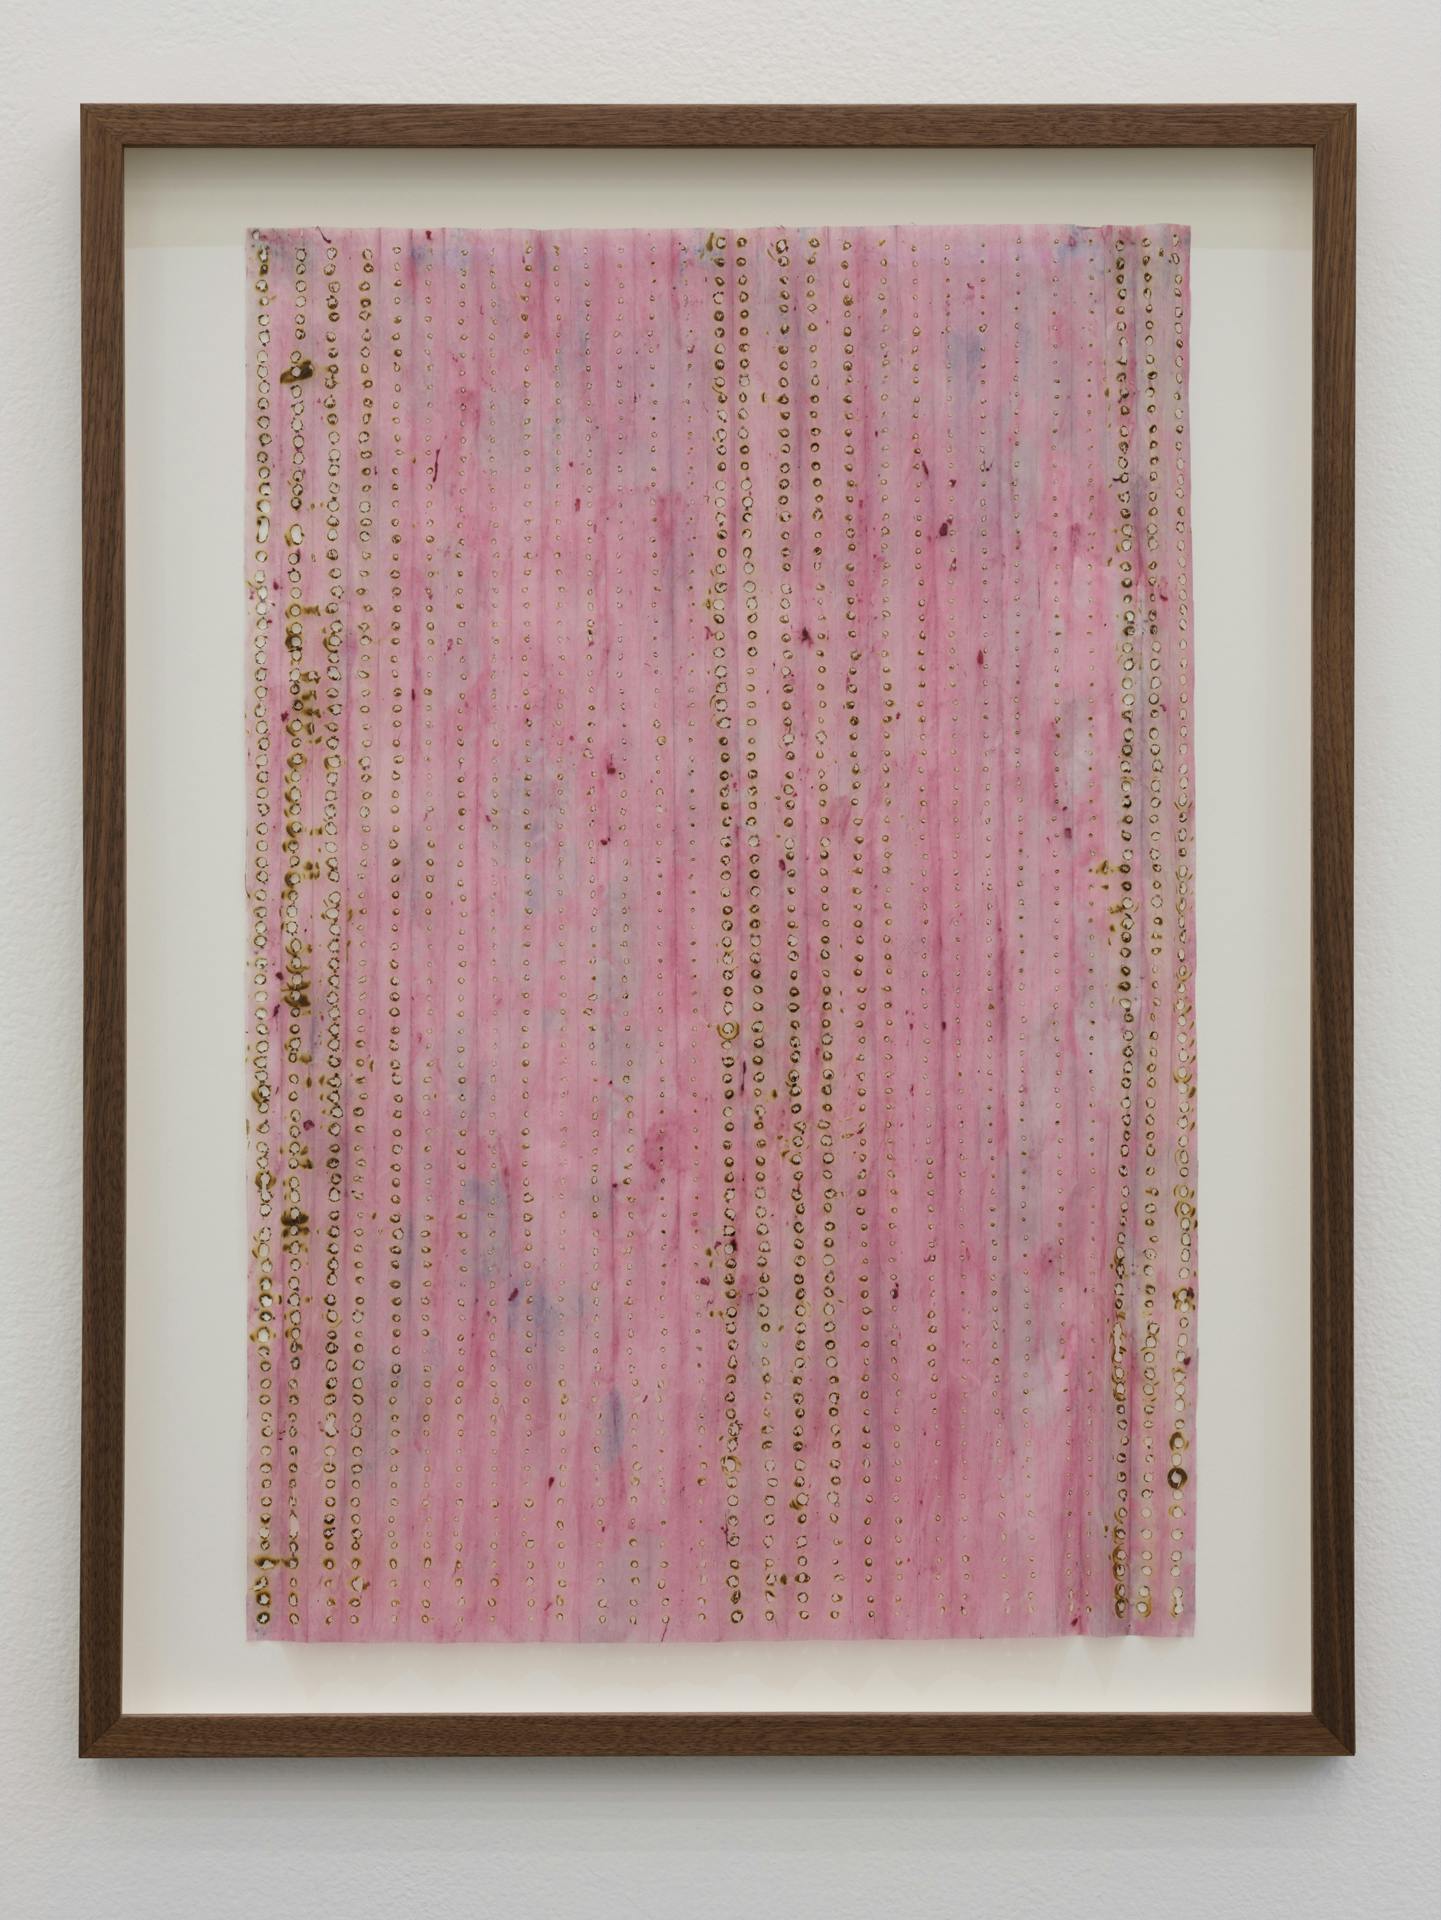 A framed collage with a pink background with small burn holes running up and down collage in columns.